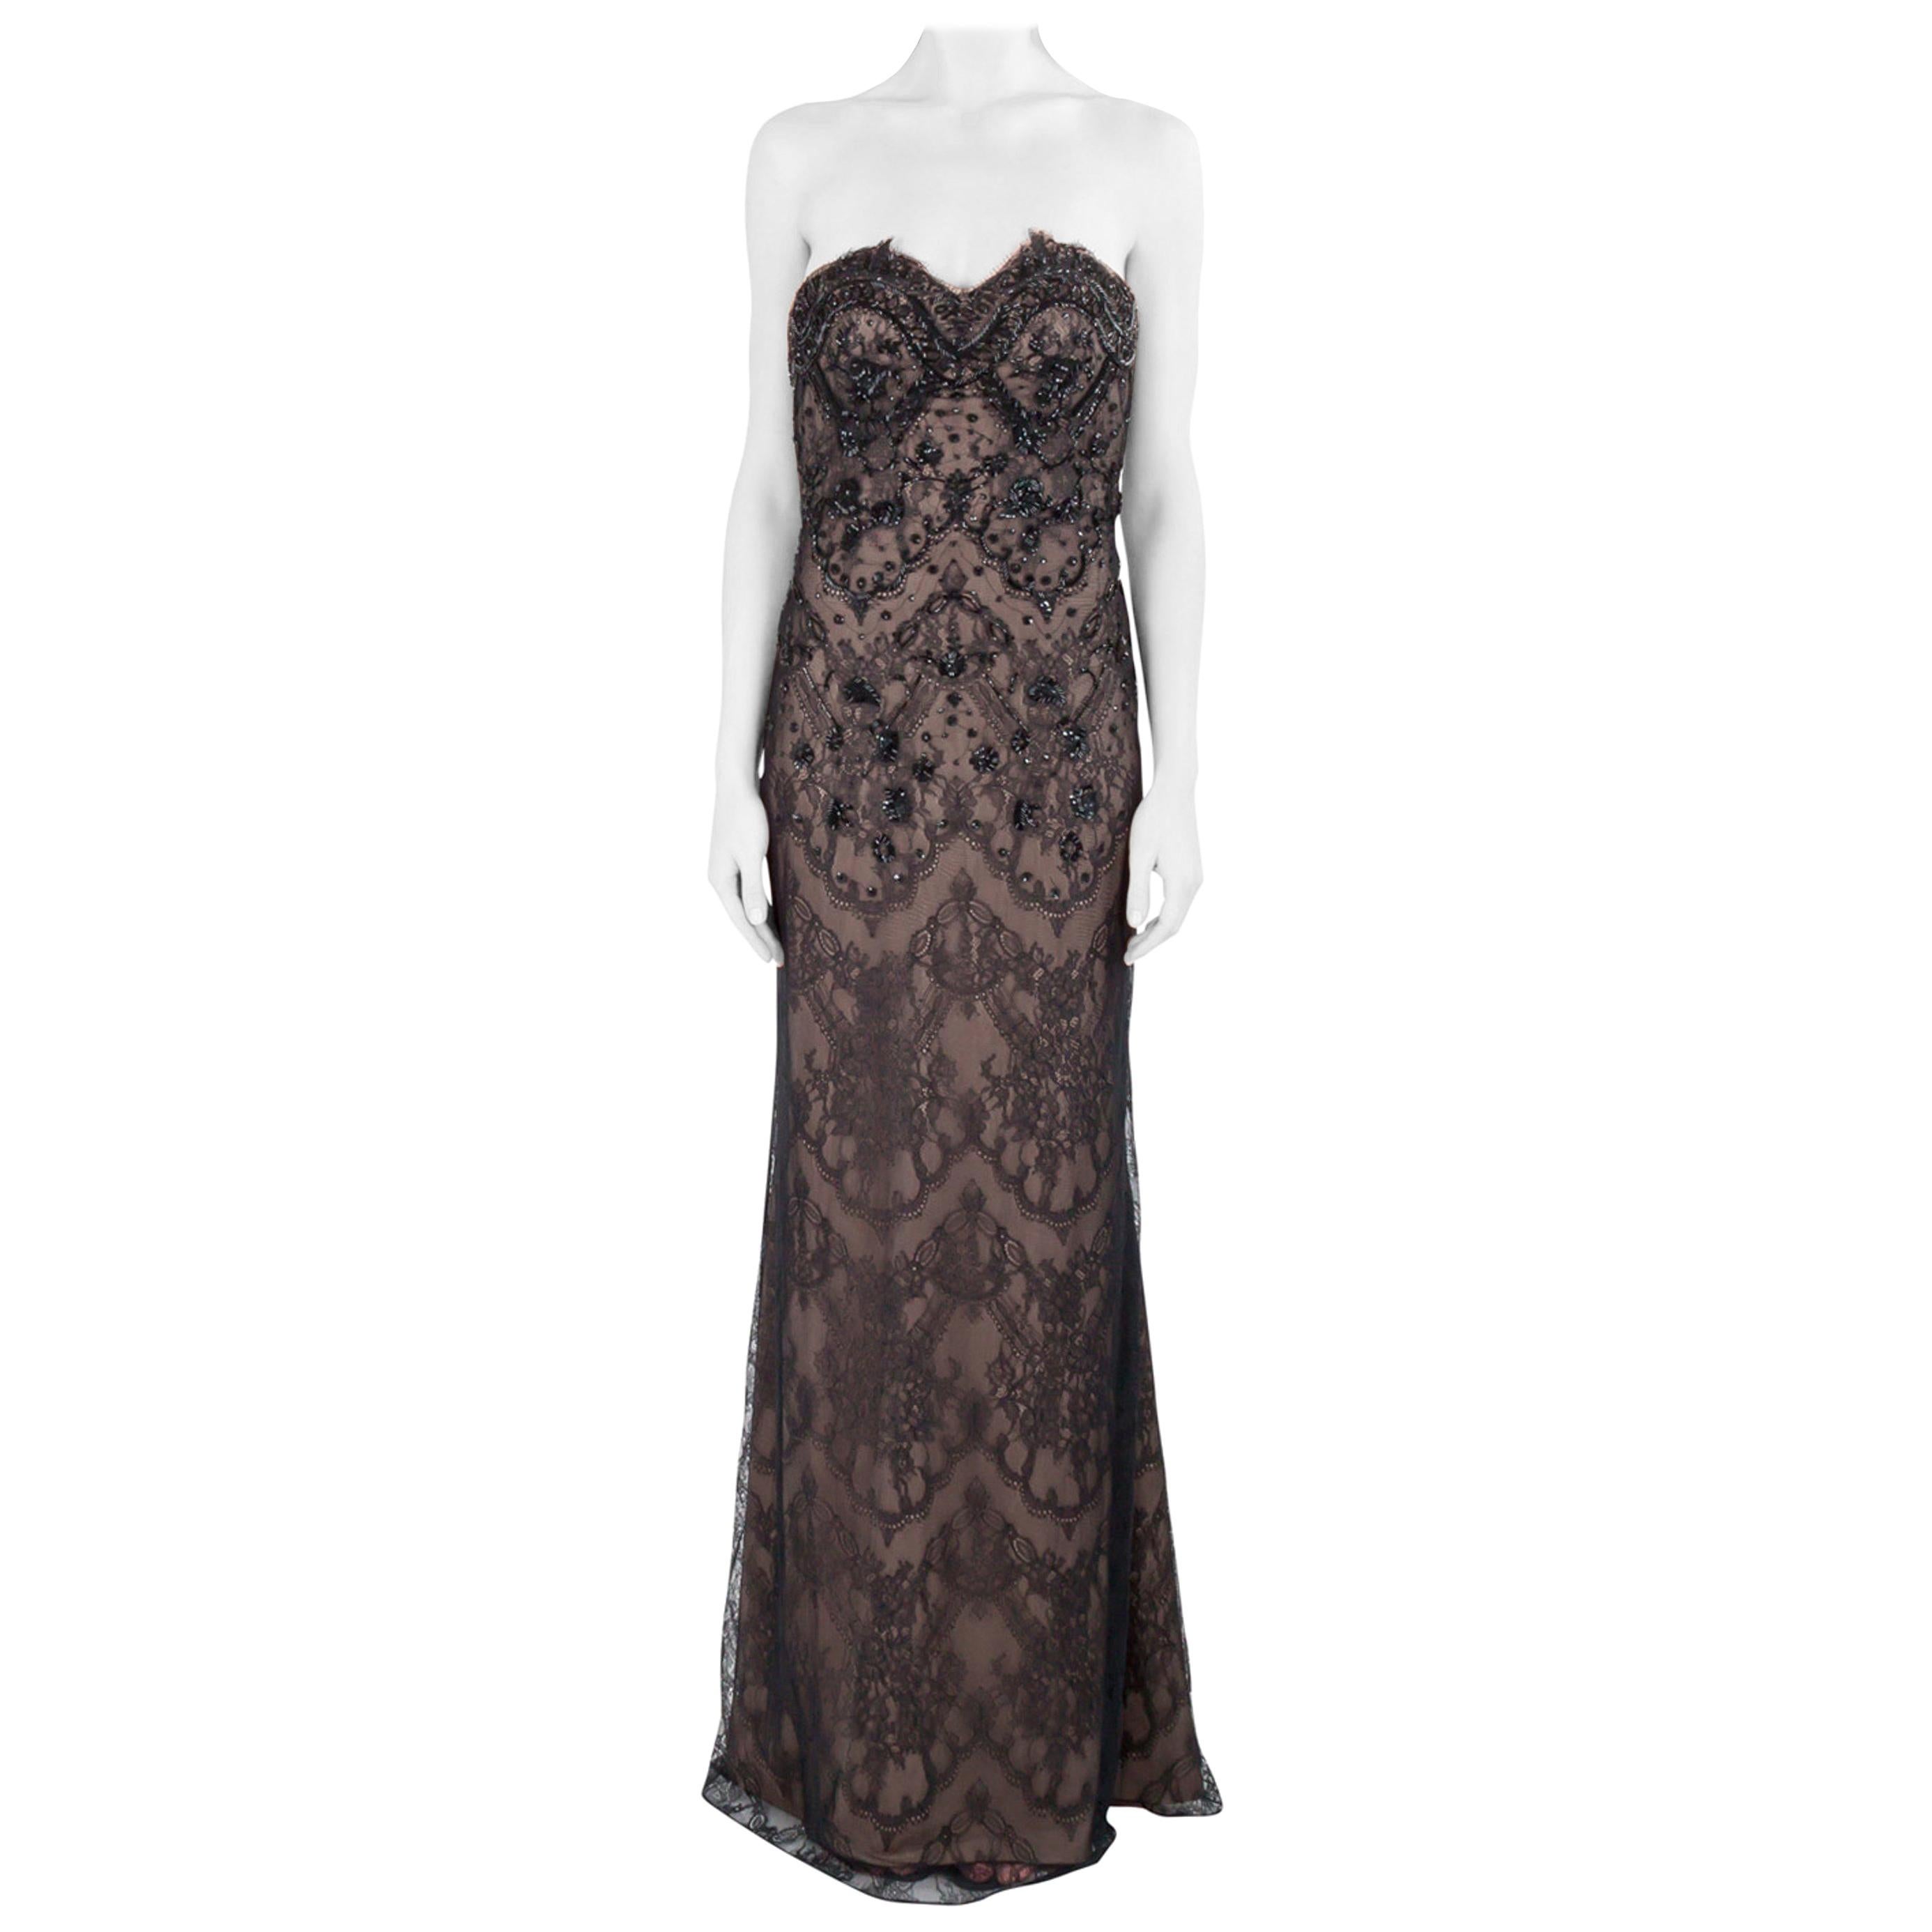 Marchesa Notte Black Embellished Lace Overlay Strapless Evening Gown M